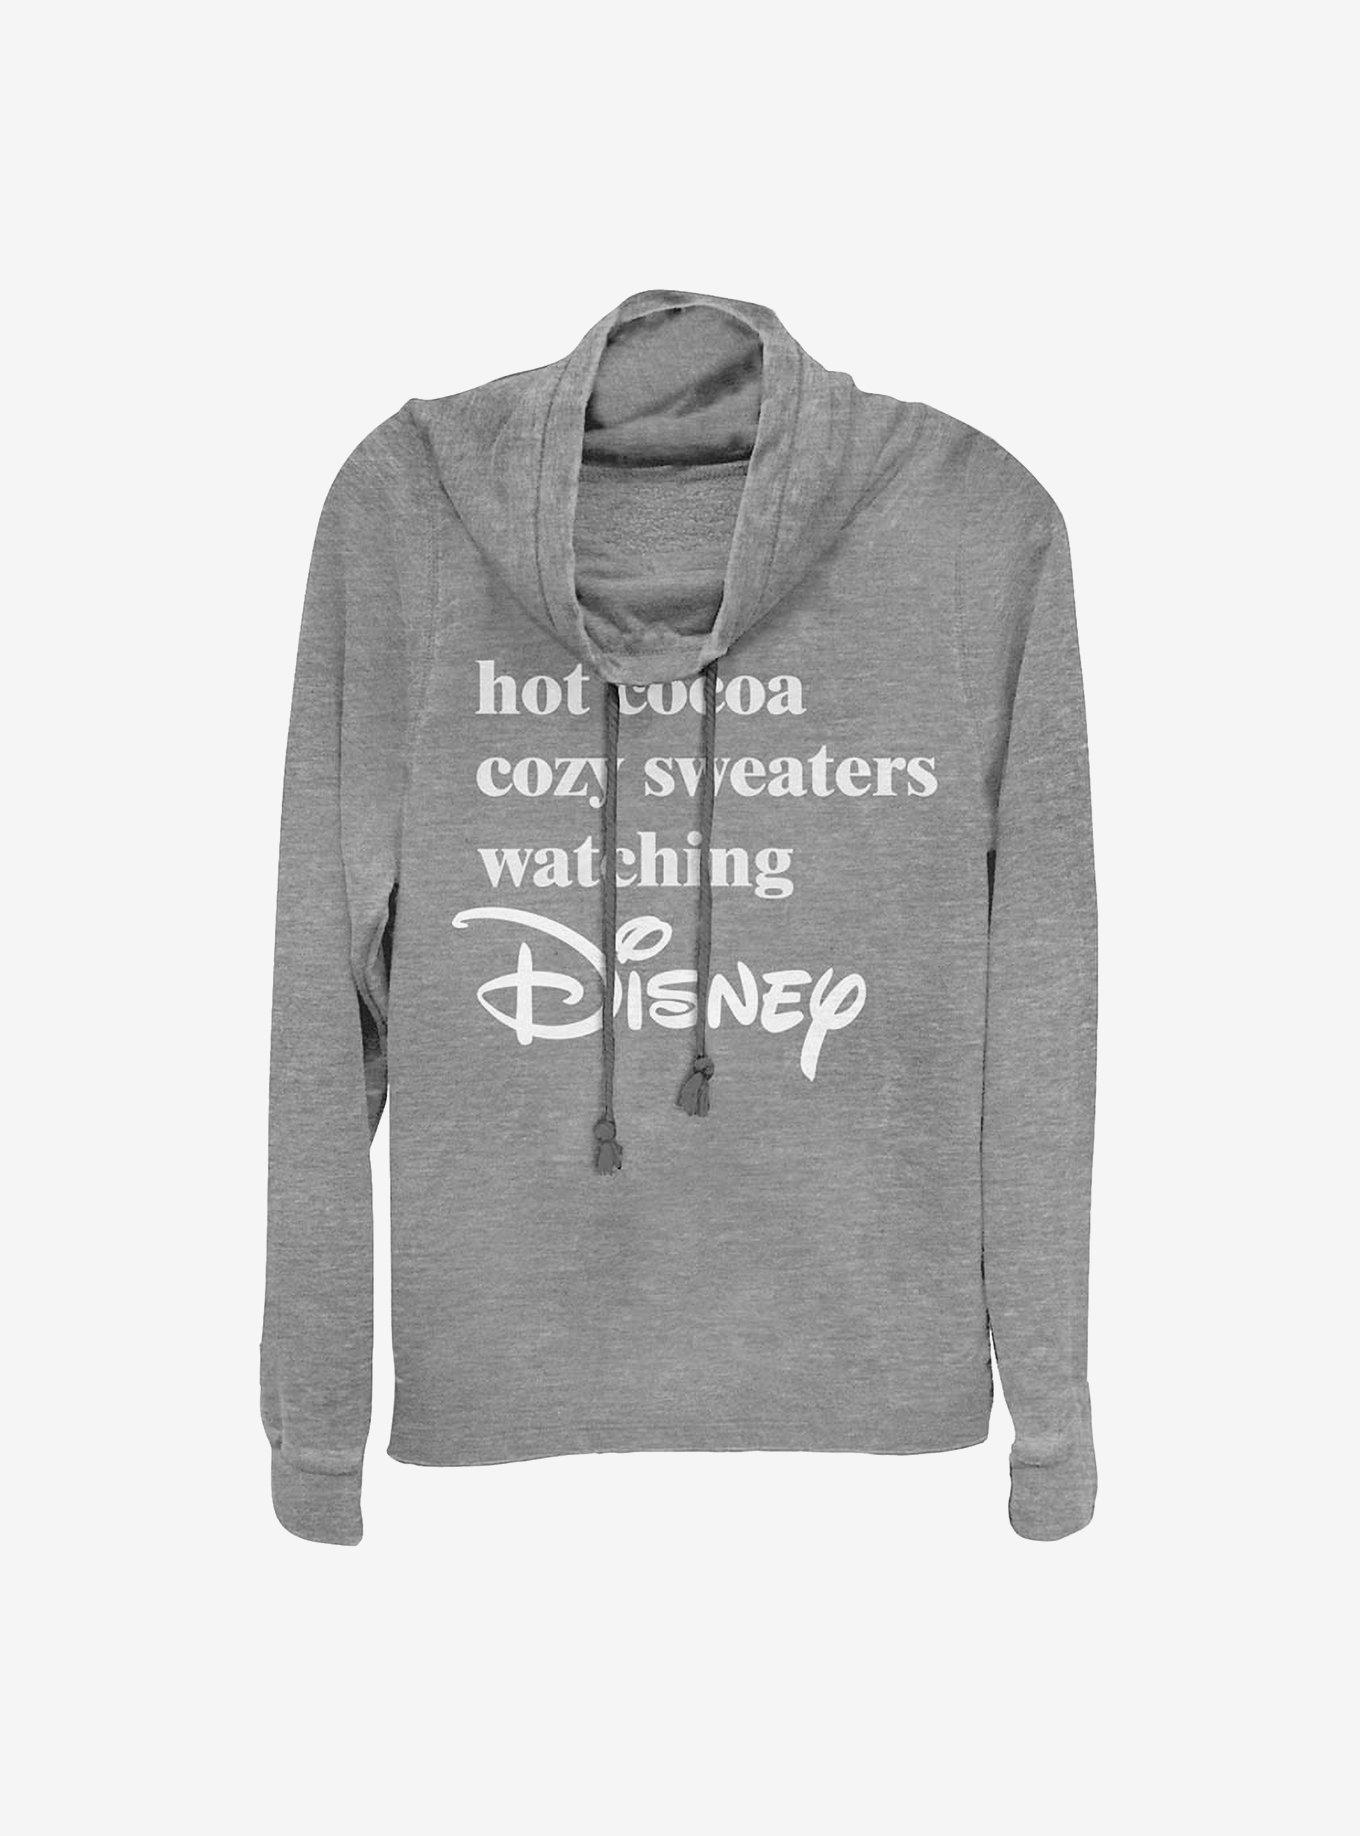 Disney Channel Cozy Vibes Cowlneck Long-Sleeve Girls Top, GRAY HTR, hi-res